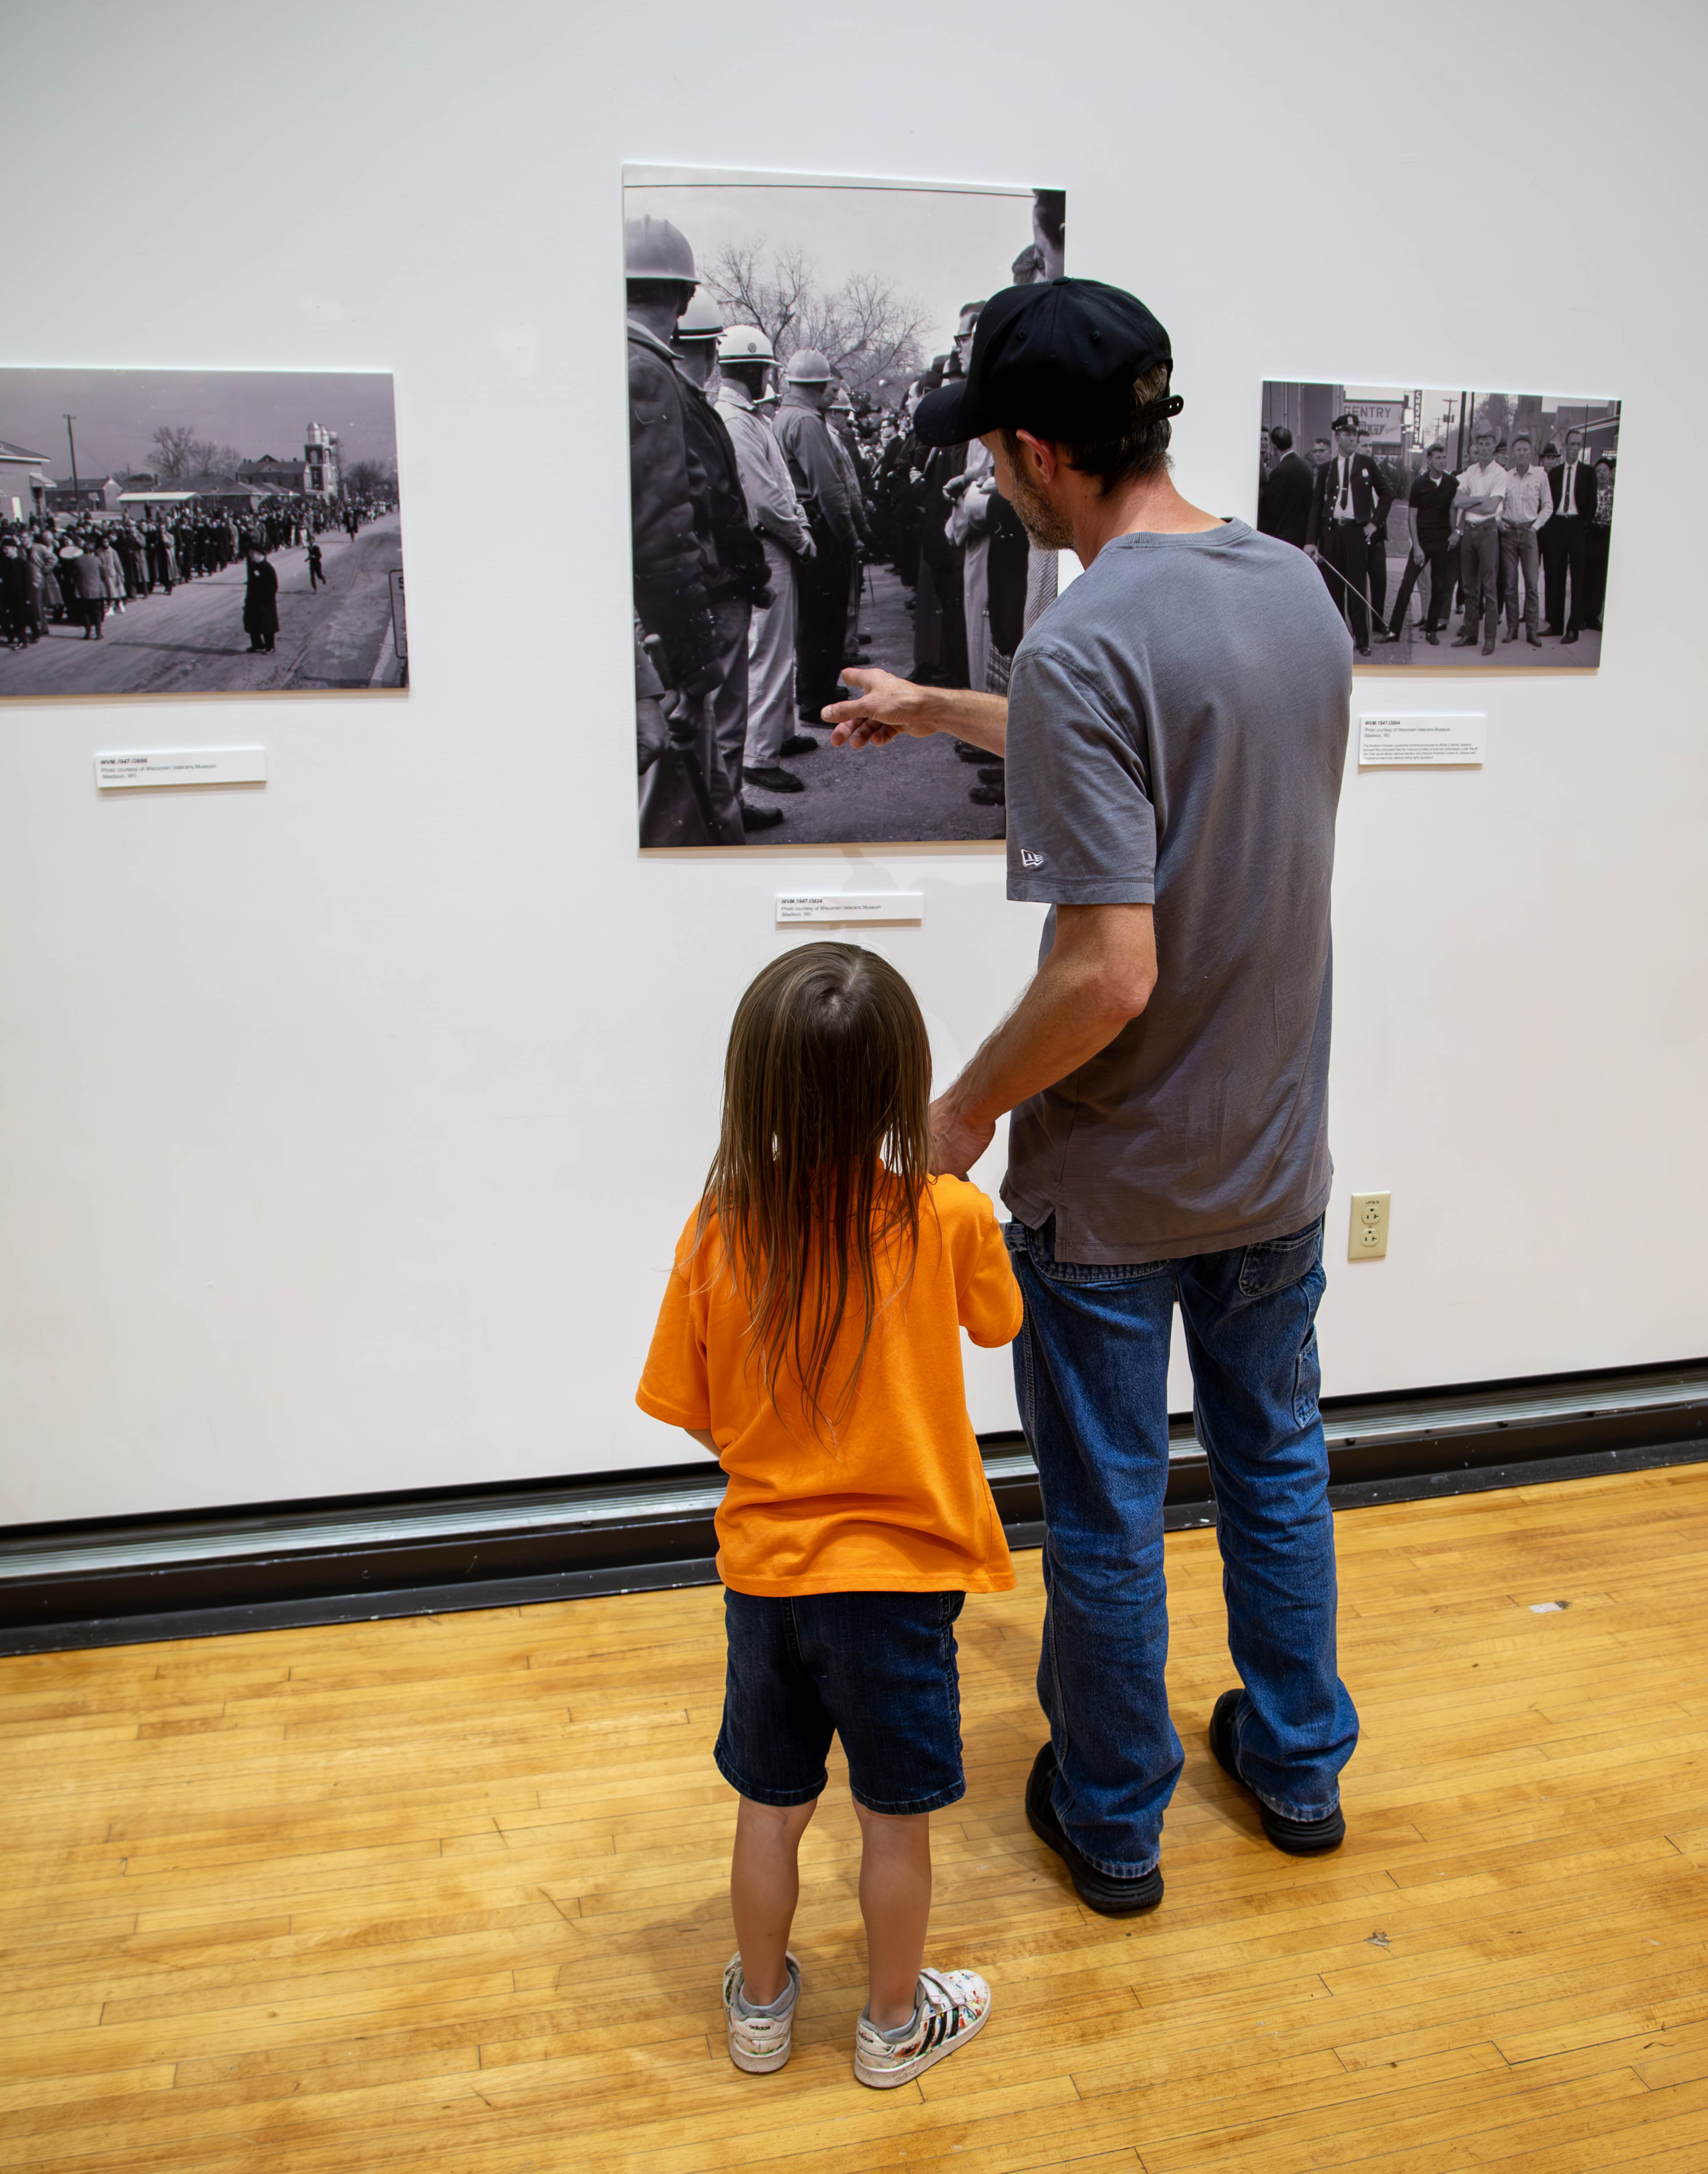 David Drew and his son, Xavier, both of Alton, take in the work of Robert J. Ellison in the Hatheway Gallery. The “Unfiltered Lens” exhibit is open through Aug. 31. JAN DONA/L&C MARKETING & PR